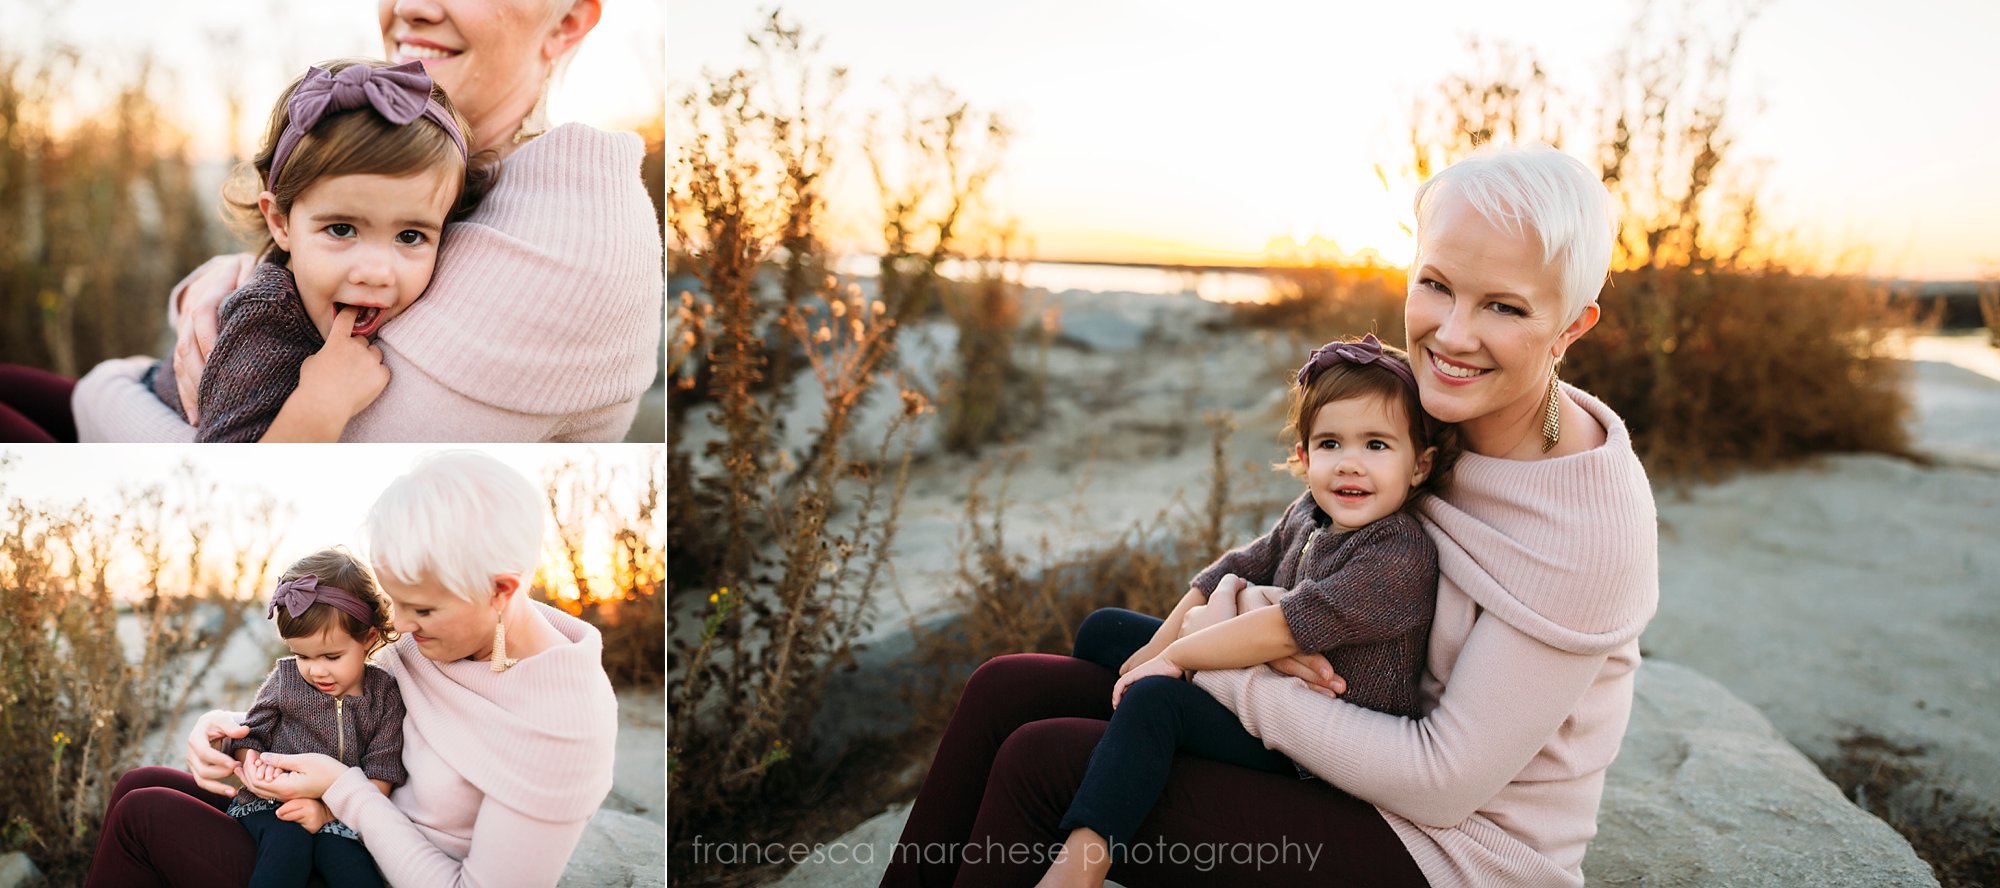 mother and child - Francesca Marchese Photography Orange County Los Angeles Southern California Family Photographer